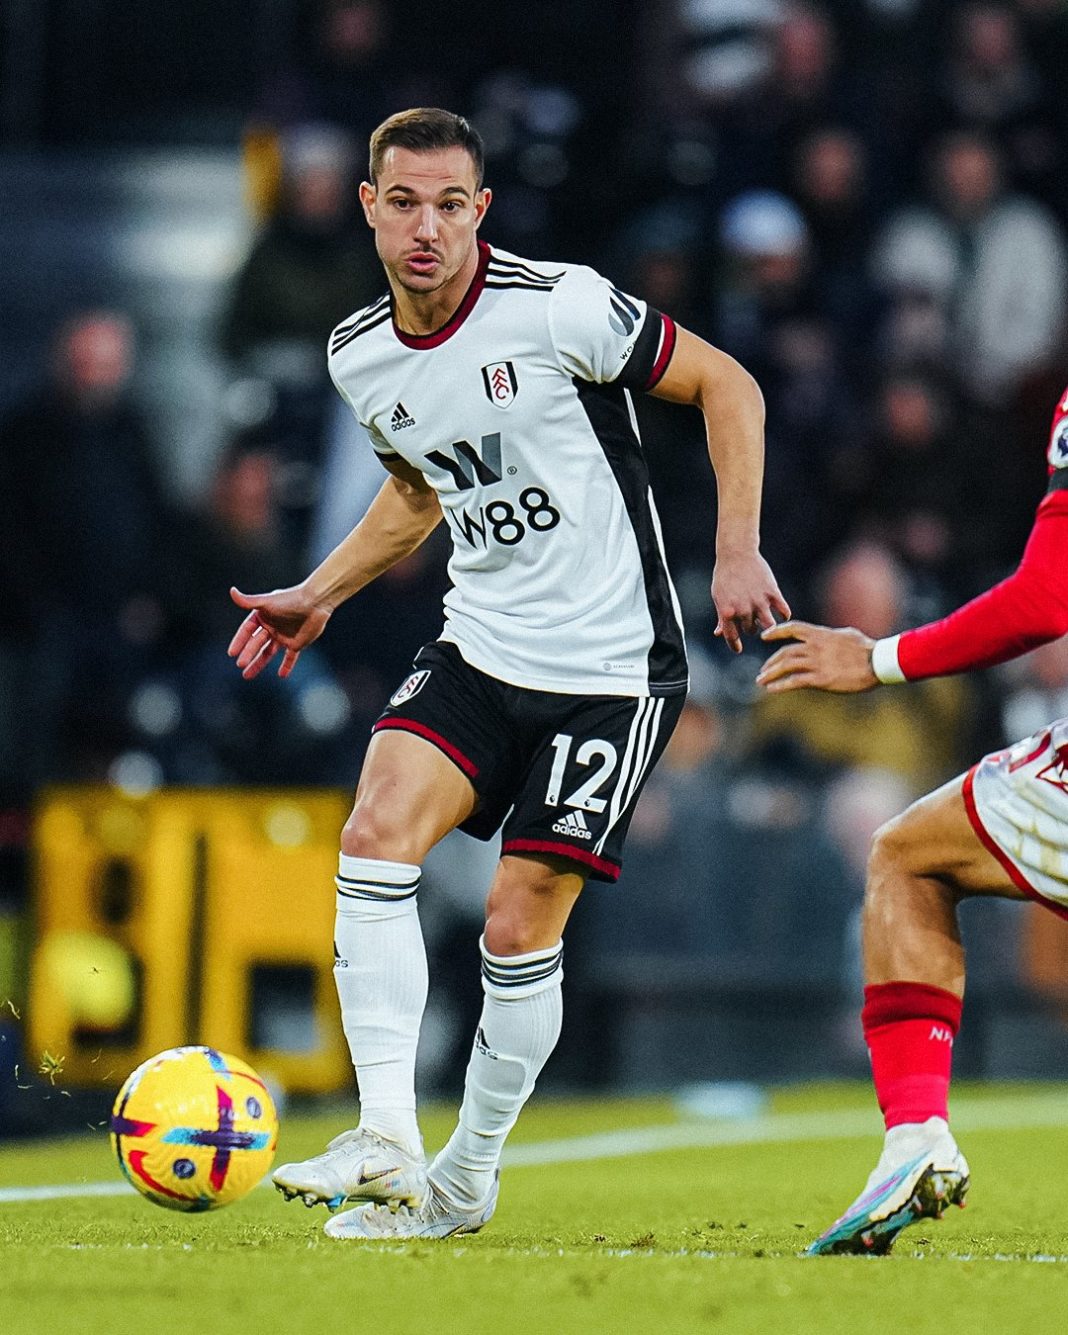 Cedric Soares playing for Fulham (Photo via Cedric on Twitter)